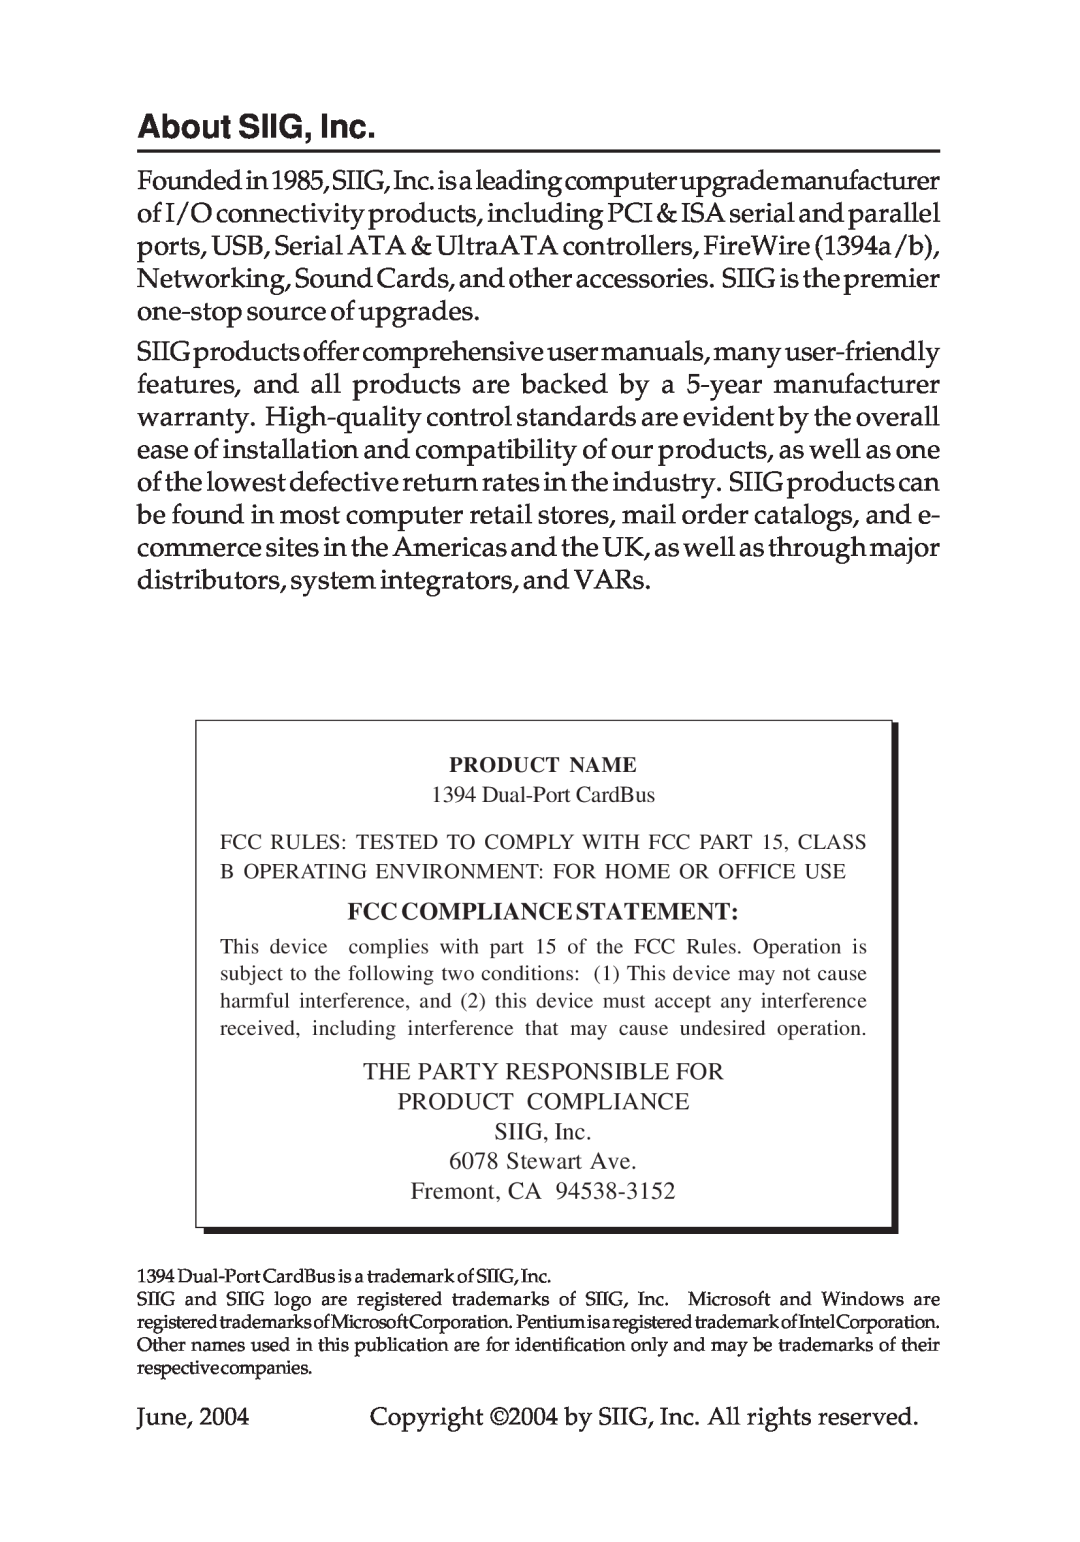 SIIG ZR, ZHLP, ZP manual About SIIG, Inc, Fcc Compliance Statement 